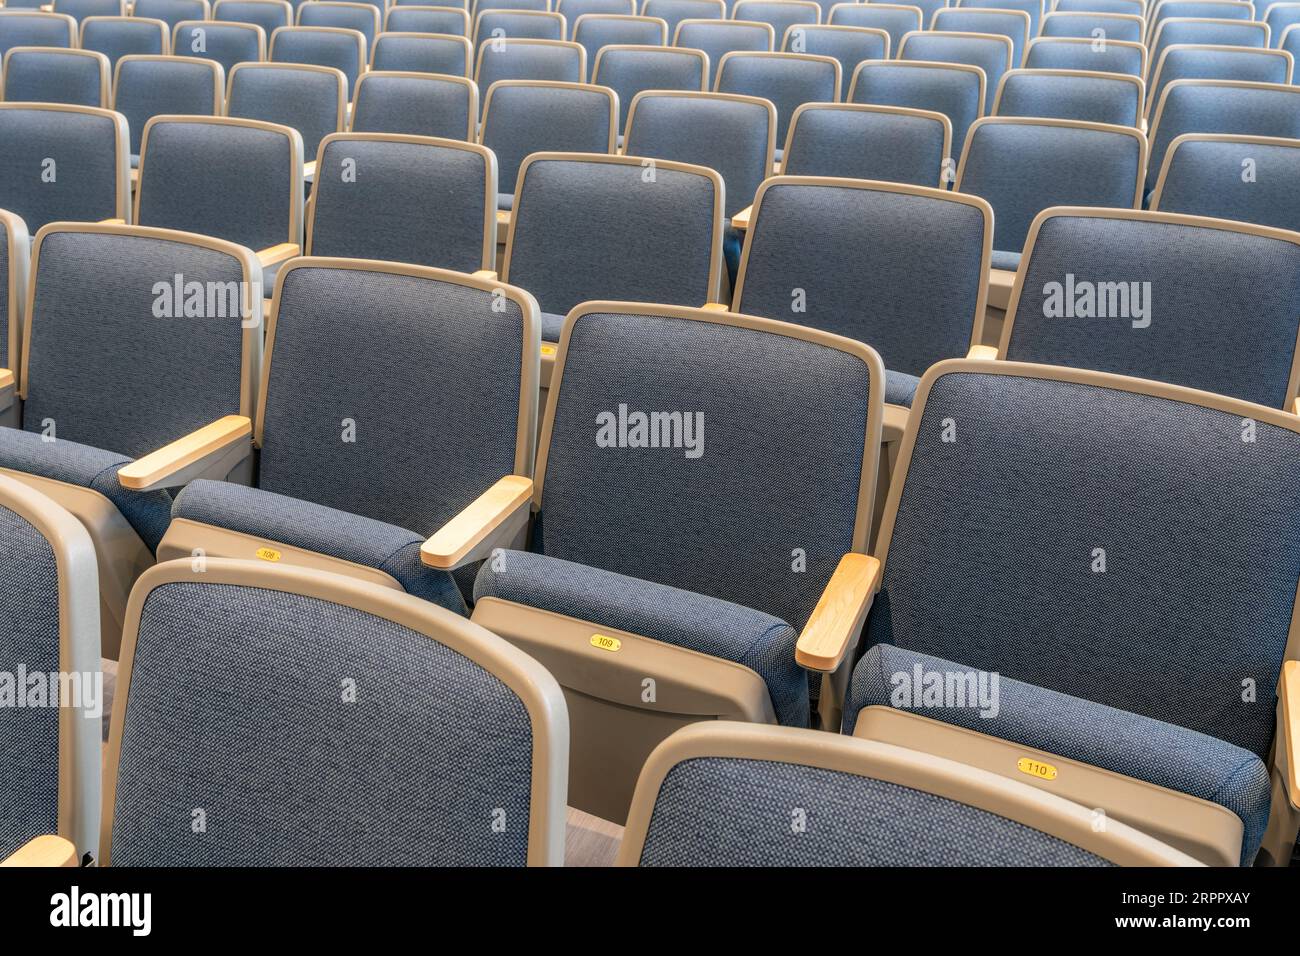 Empty gray and blue theater, auditorium seats, chairs. Stock Photo